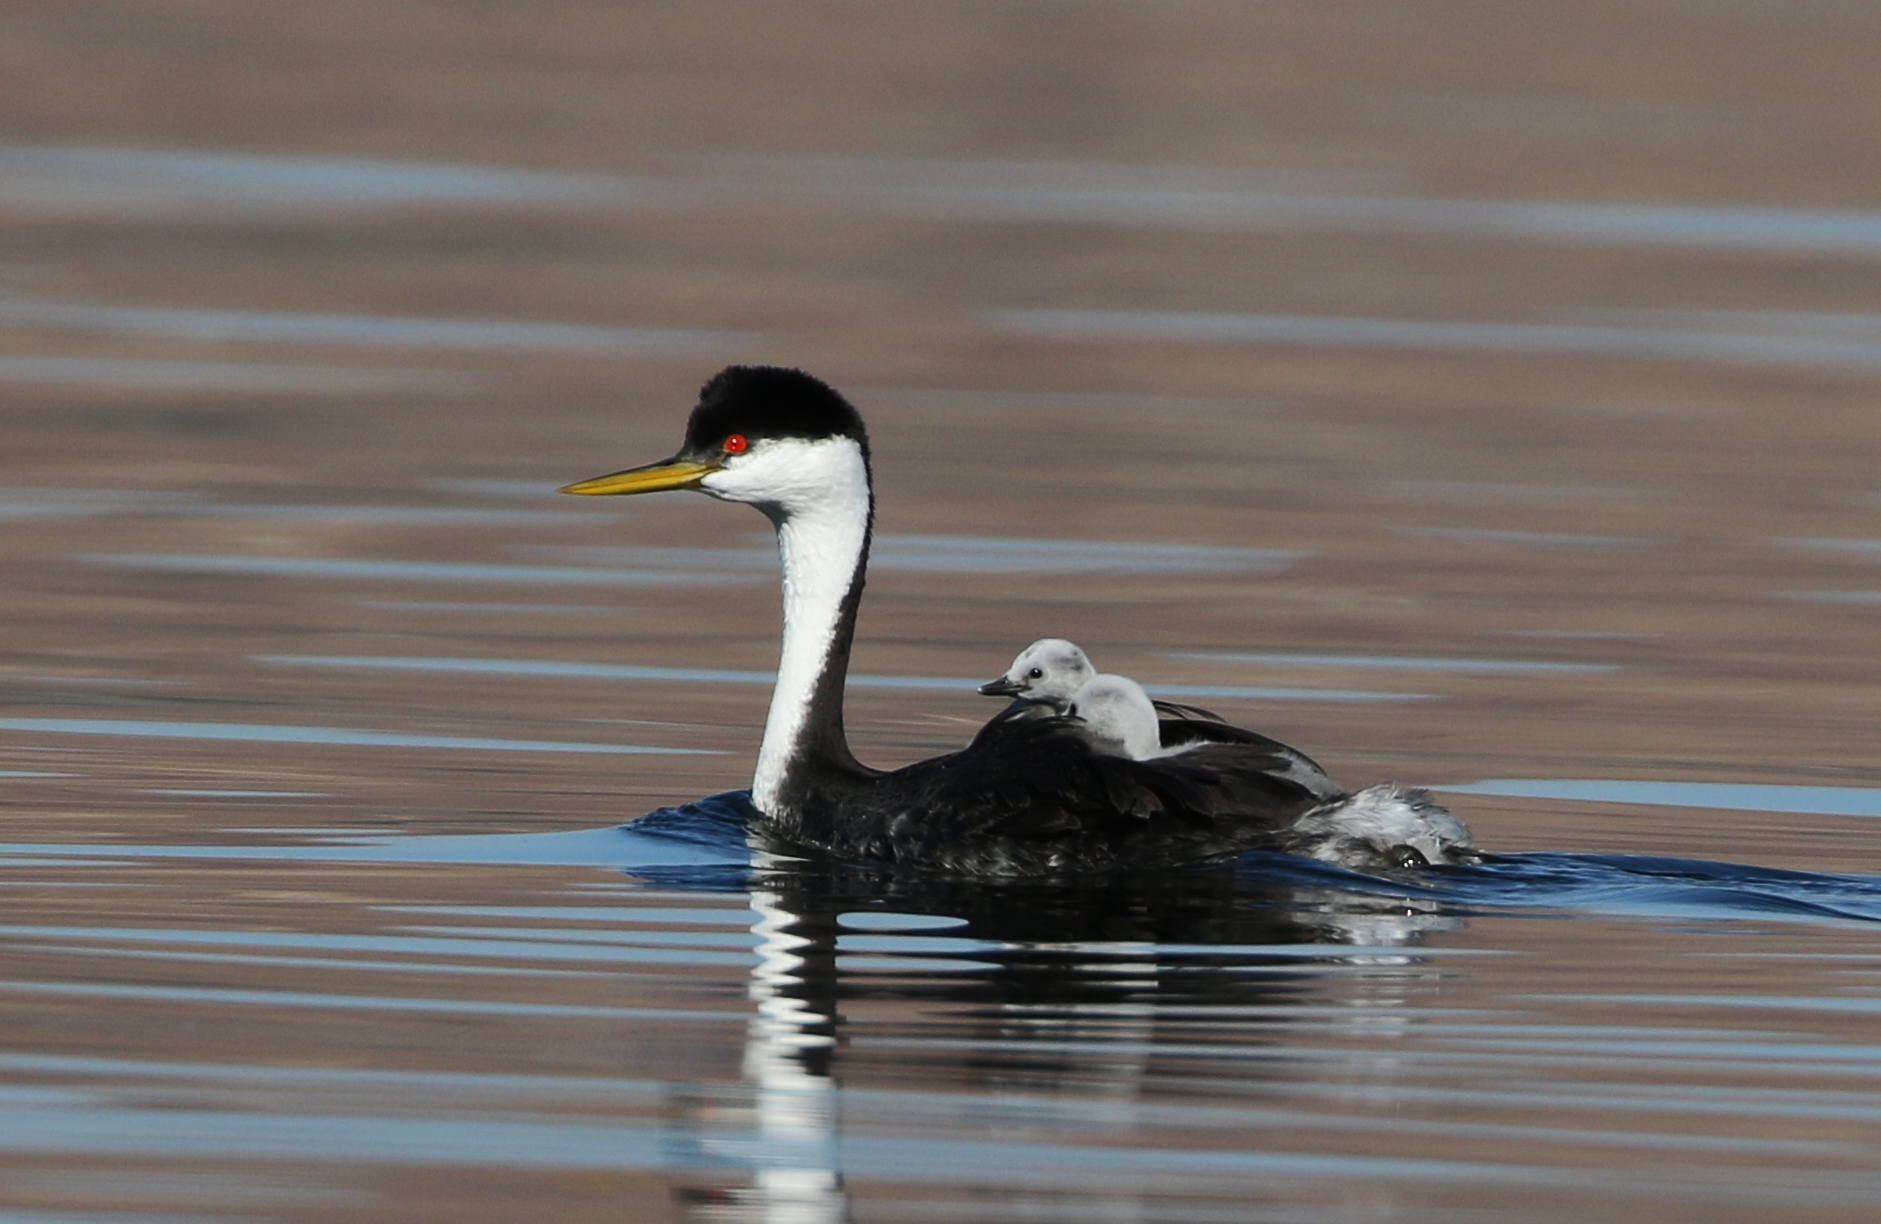 The western grebe has a long, graceful neck, bright red eyes, and distinctive black and white colouration. TOM BENSON.